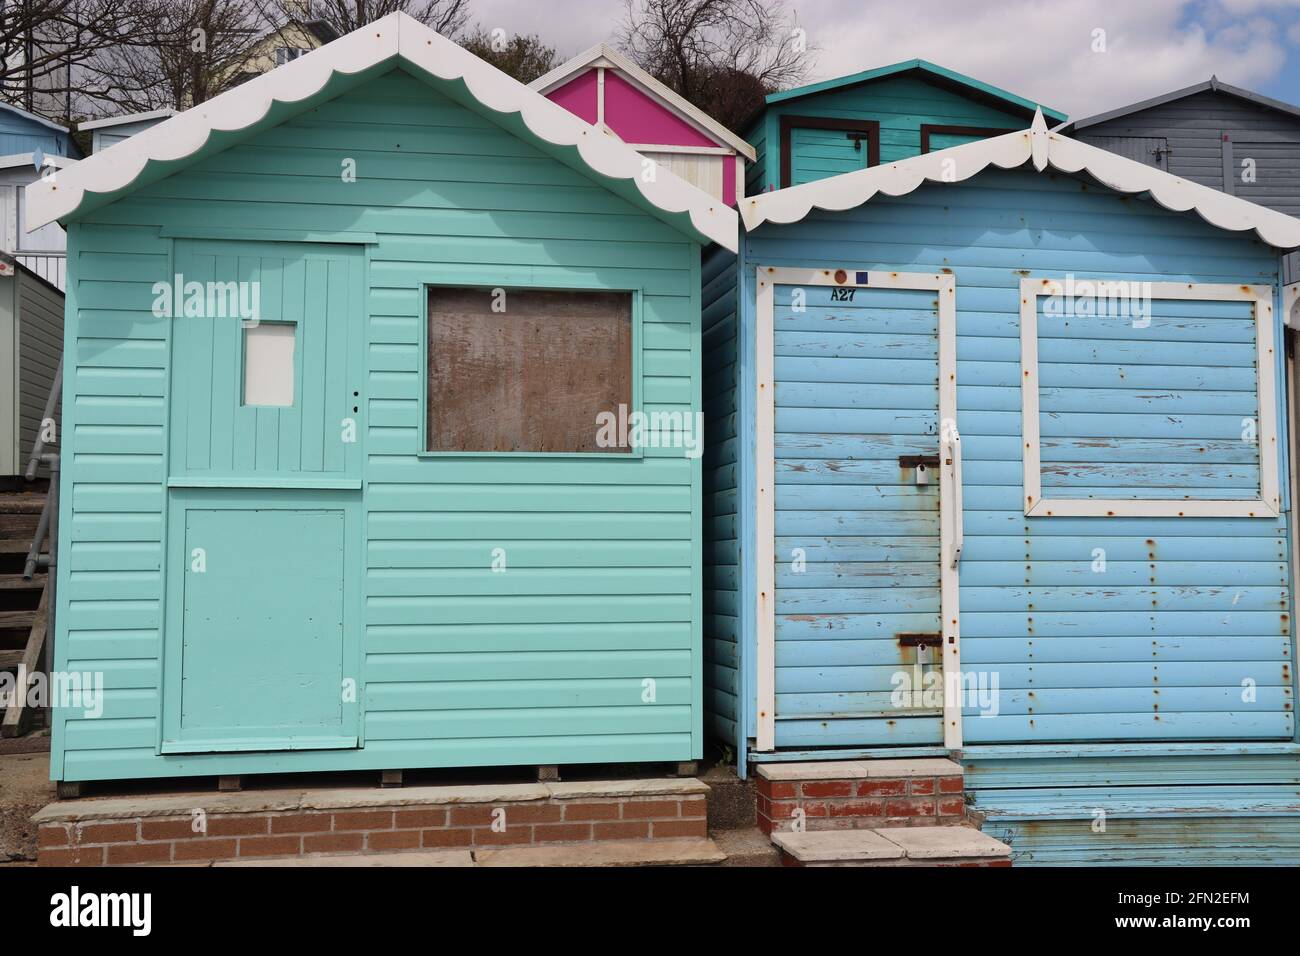 Colourful Beach huts at walton On The Naze Essex UK Stock Photo